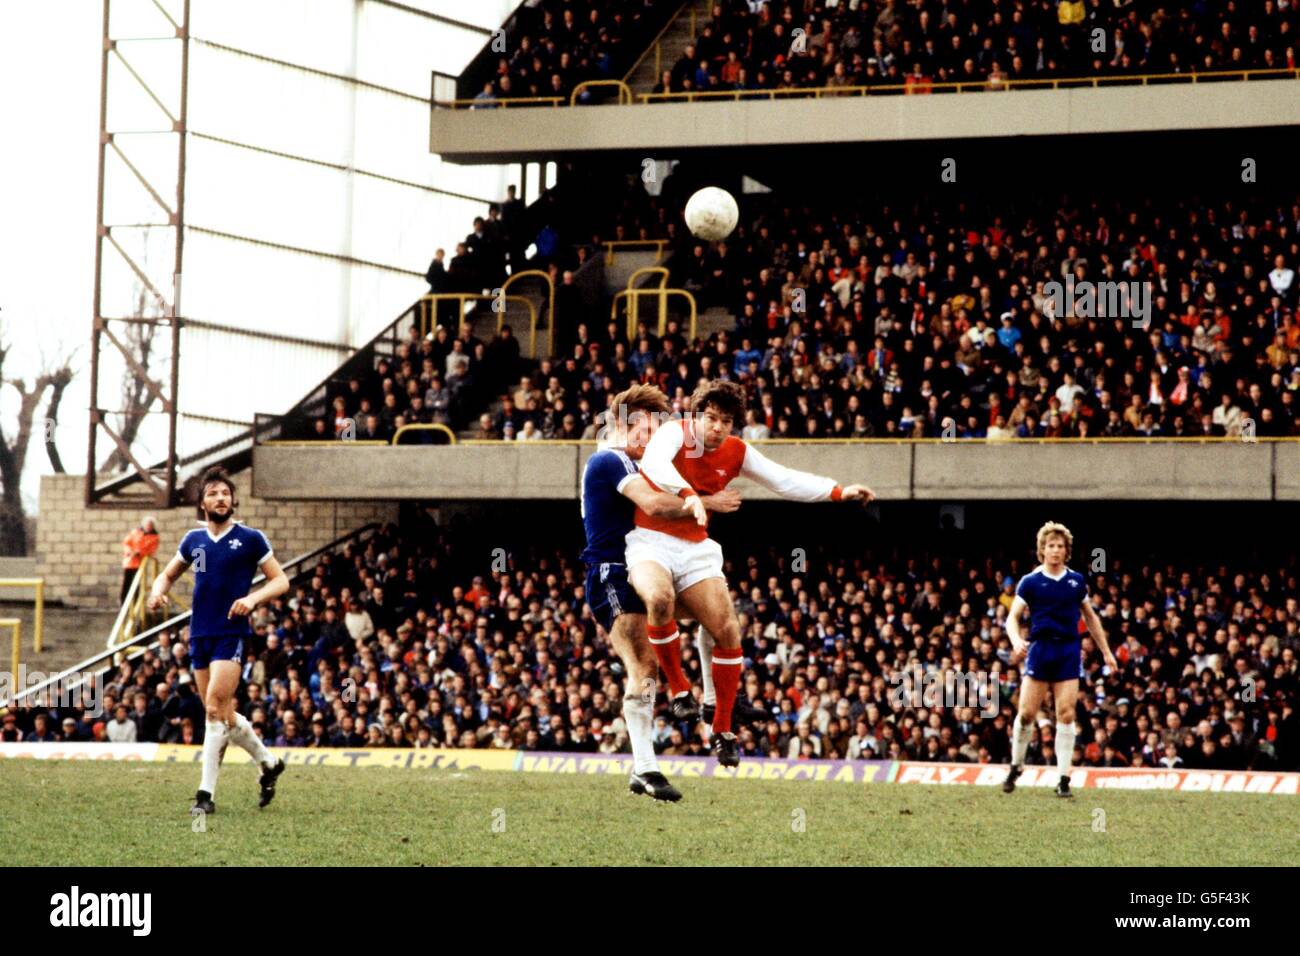 Football - Football League Division One - Chelsea v Arsenal Banque D'Images